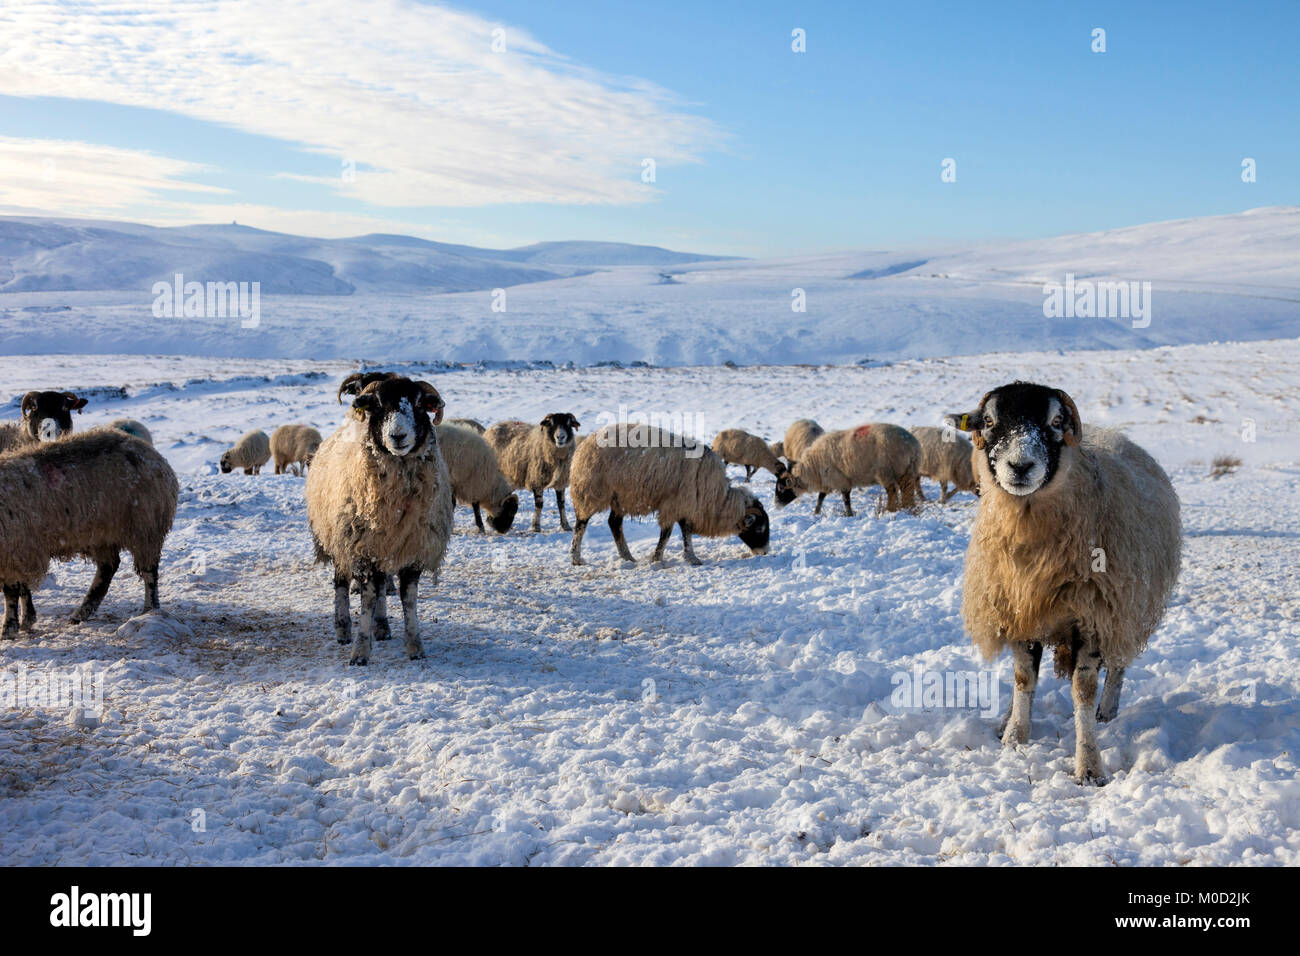 Upper Teesdale, County Durham UK. Saturday 20th January 2018. UK Weather. With a backdrop of the highest mountain in the Pennines, Cross Fell, these well insulated and hardy Swaledale sheep are given extra feed each day to help them through the cold conditions. Credit: David Forster/Alamy Live News Stock Photo